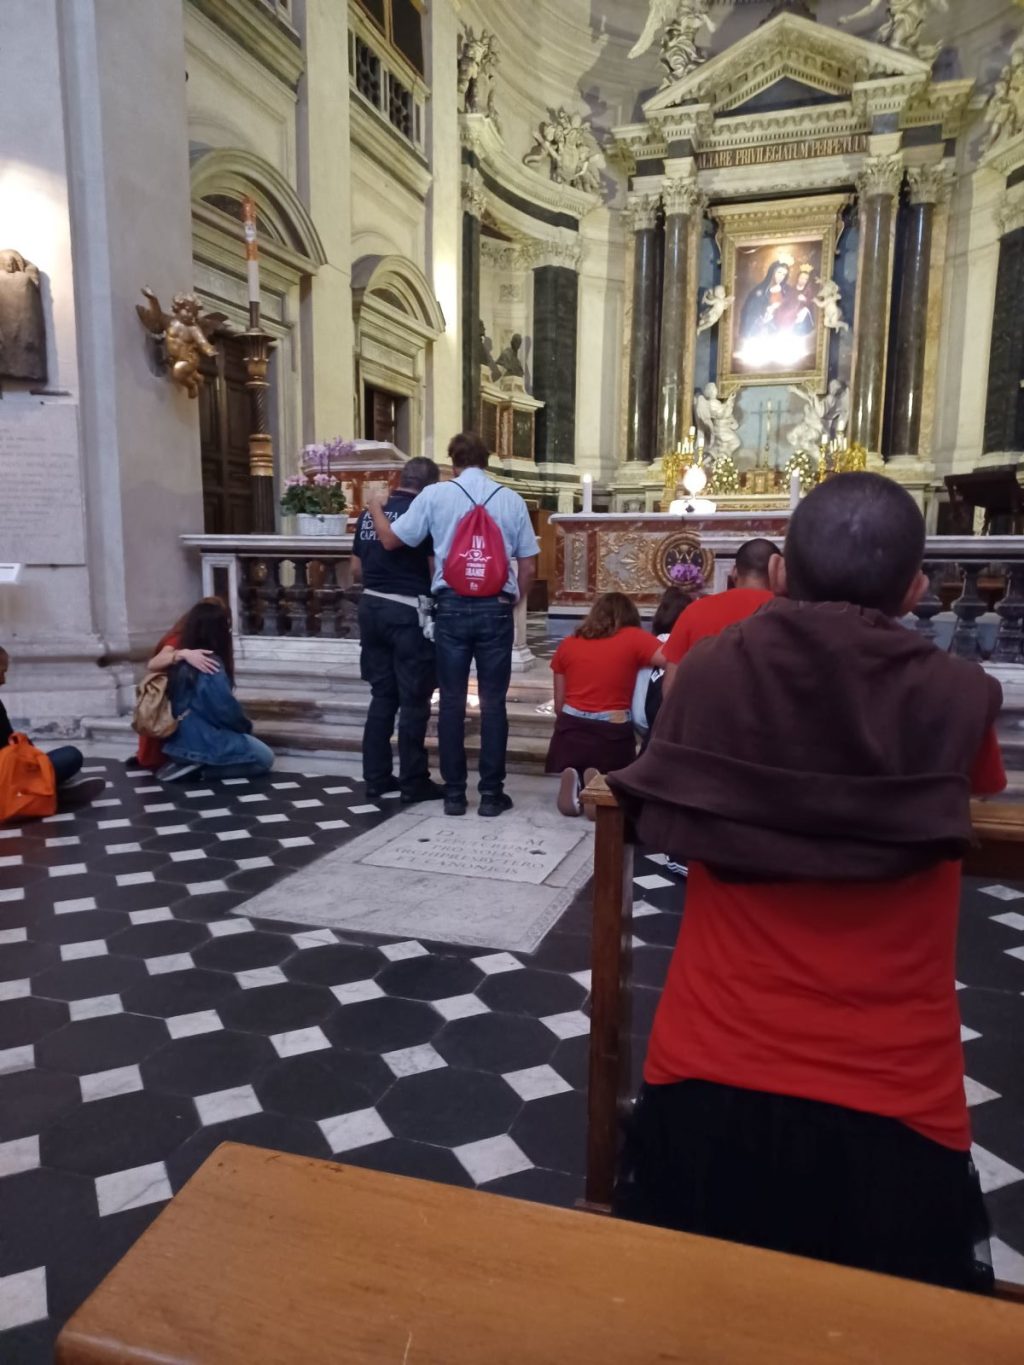 The New Horizons Community doing a "light in the darkness" eucharistic adoration as part of their evangelizing street mission in Rome